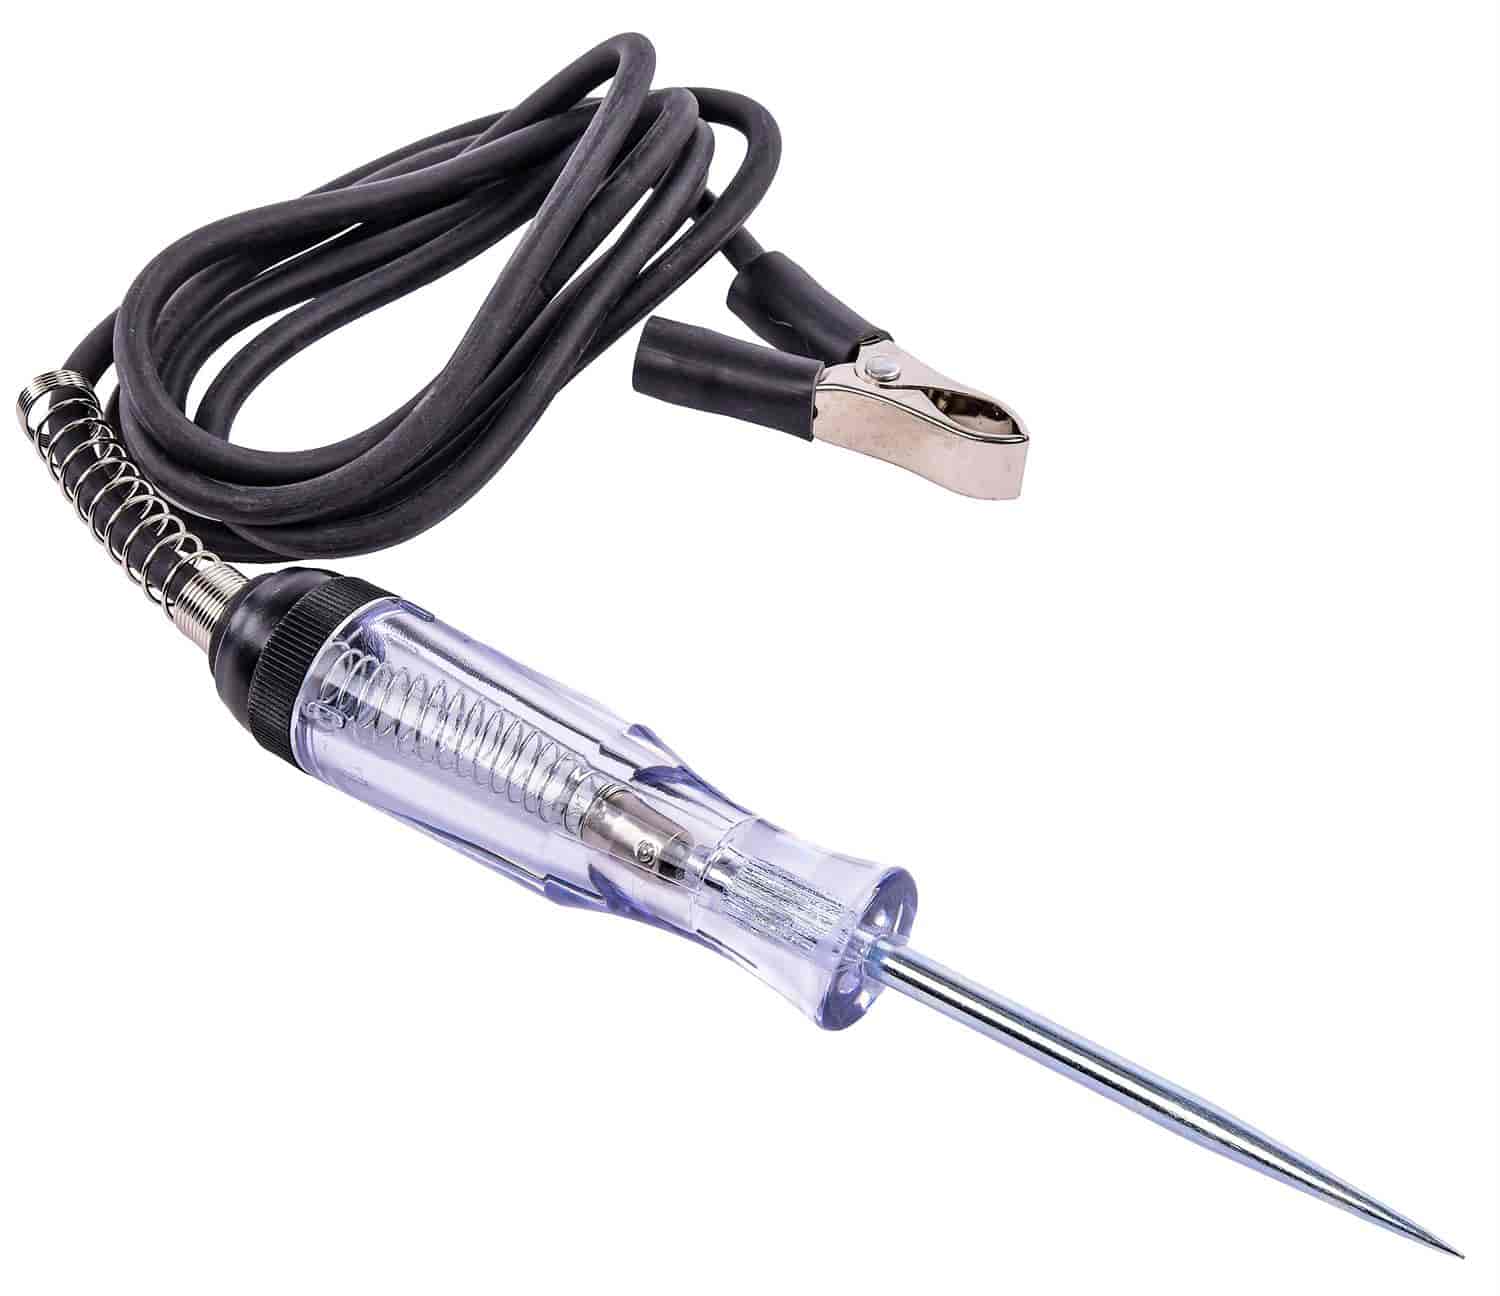 Heavy Duty Circuit Tester for 6, 12 & 24 Volt Systems